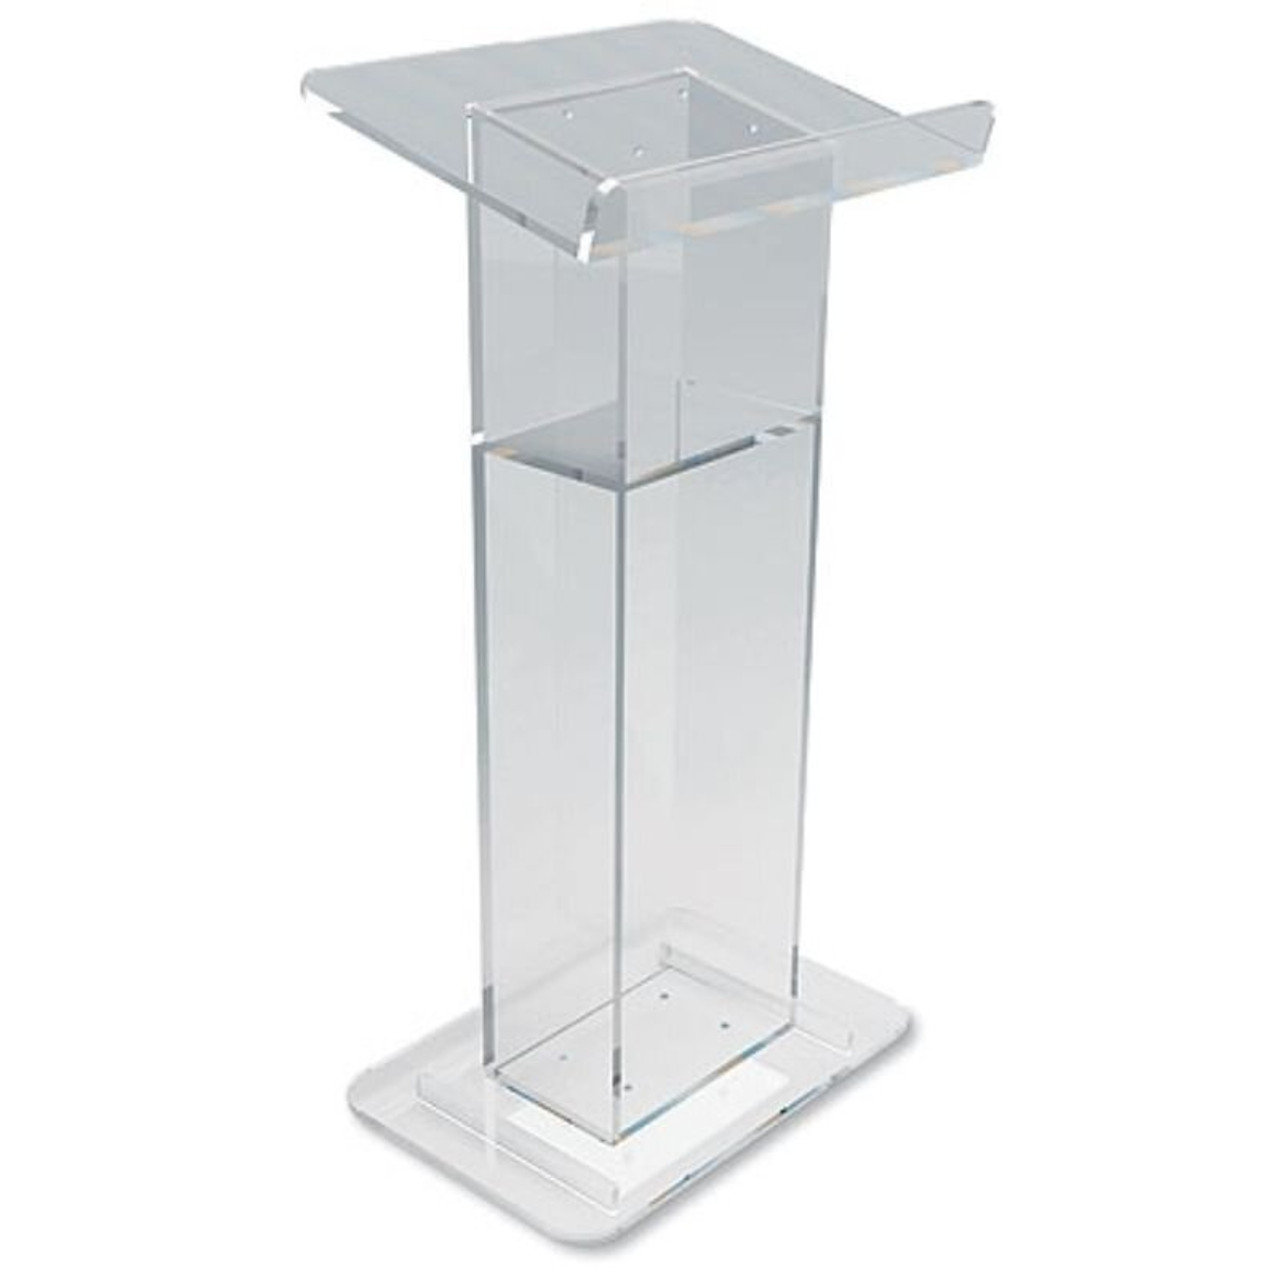 Everything Stand Metal Stainless Iron Book Stand and Podium